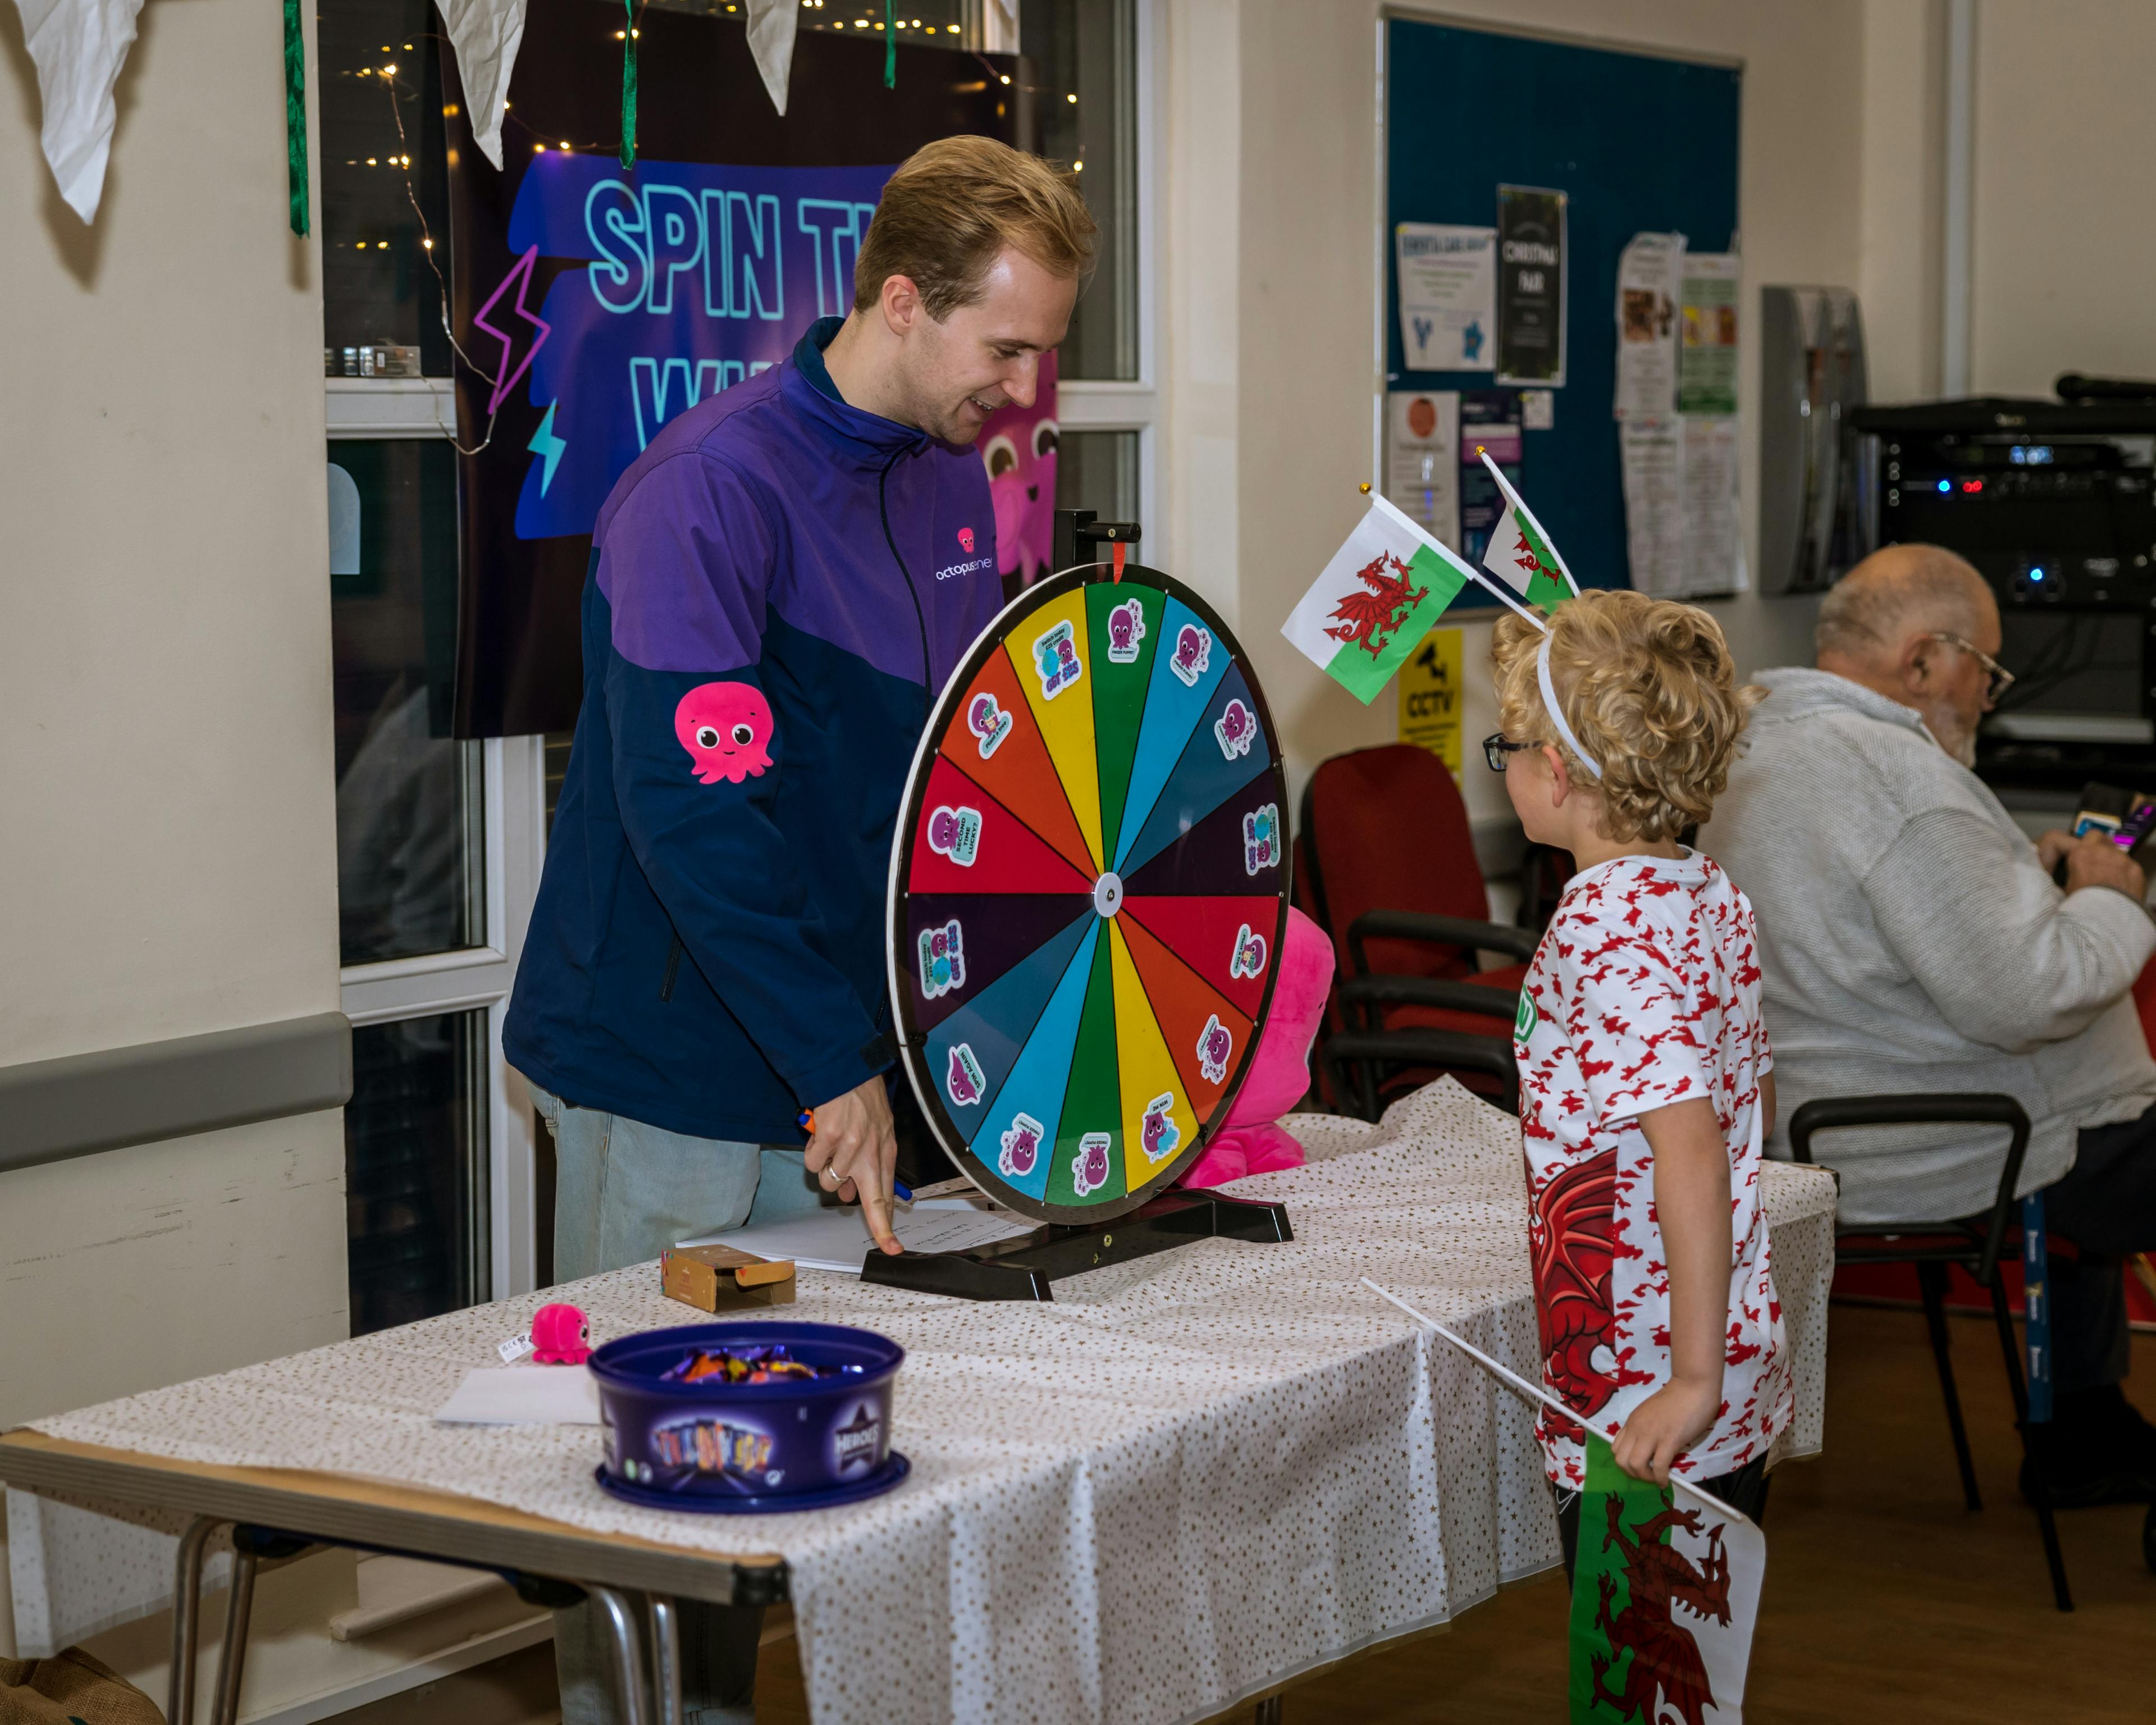 spin the wheel wales event